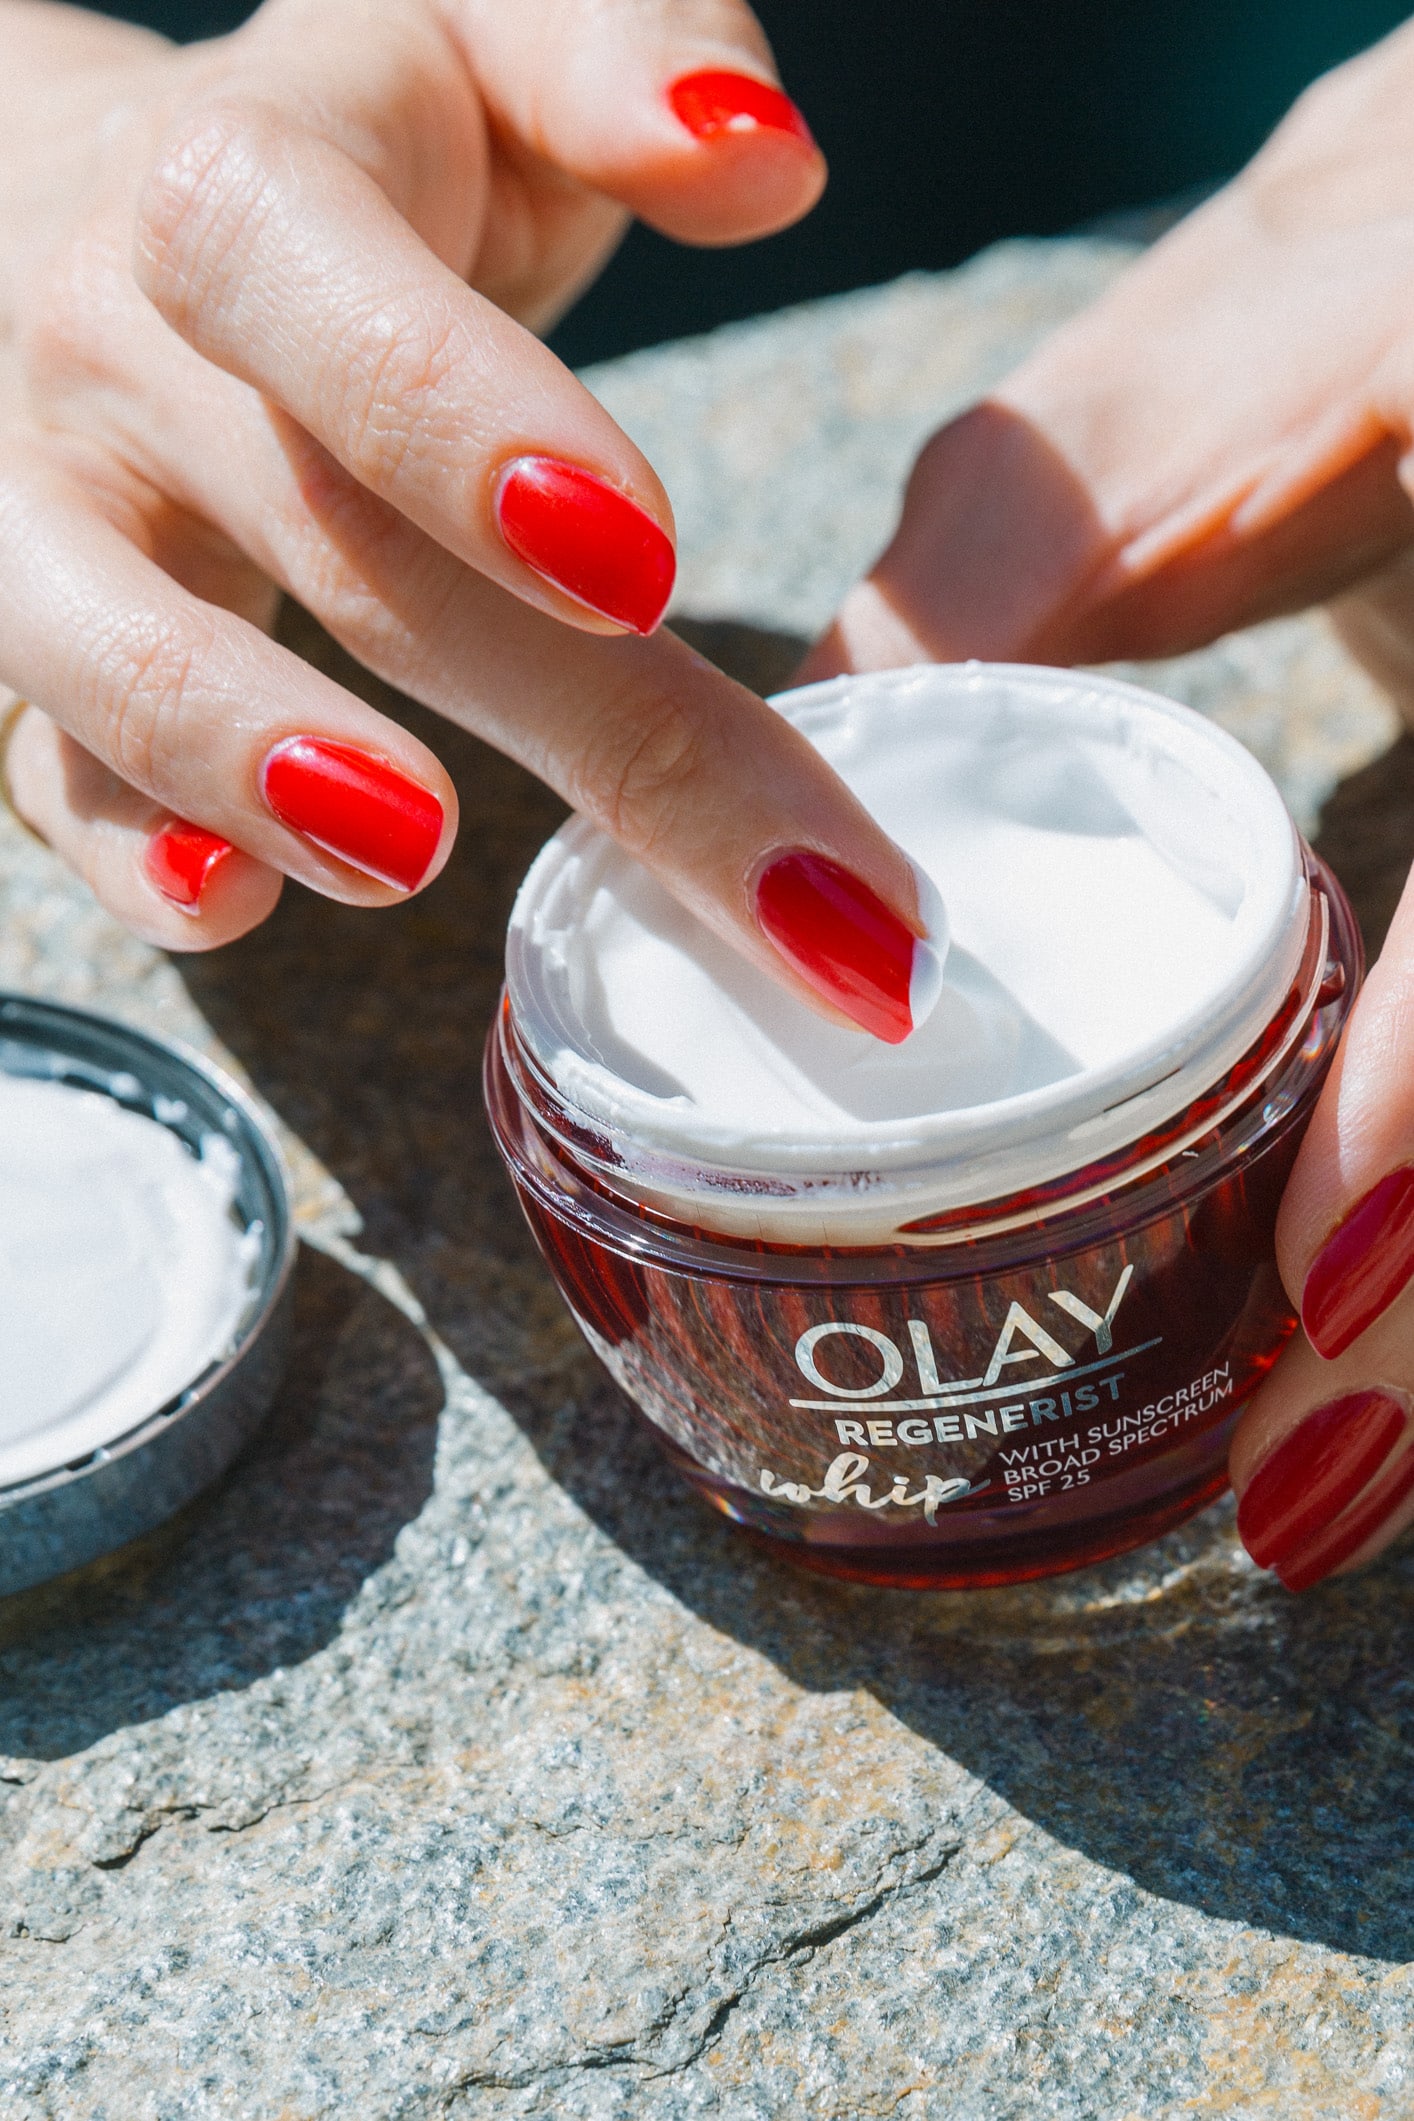 Louise Roe Olay Whips SPF Moisturizers